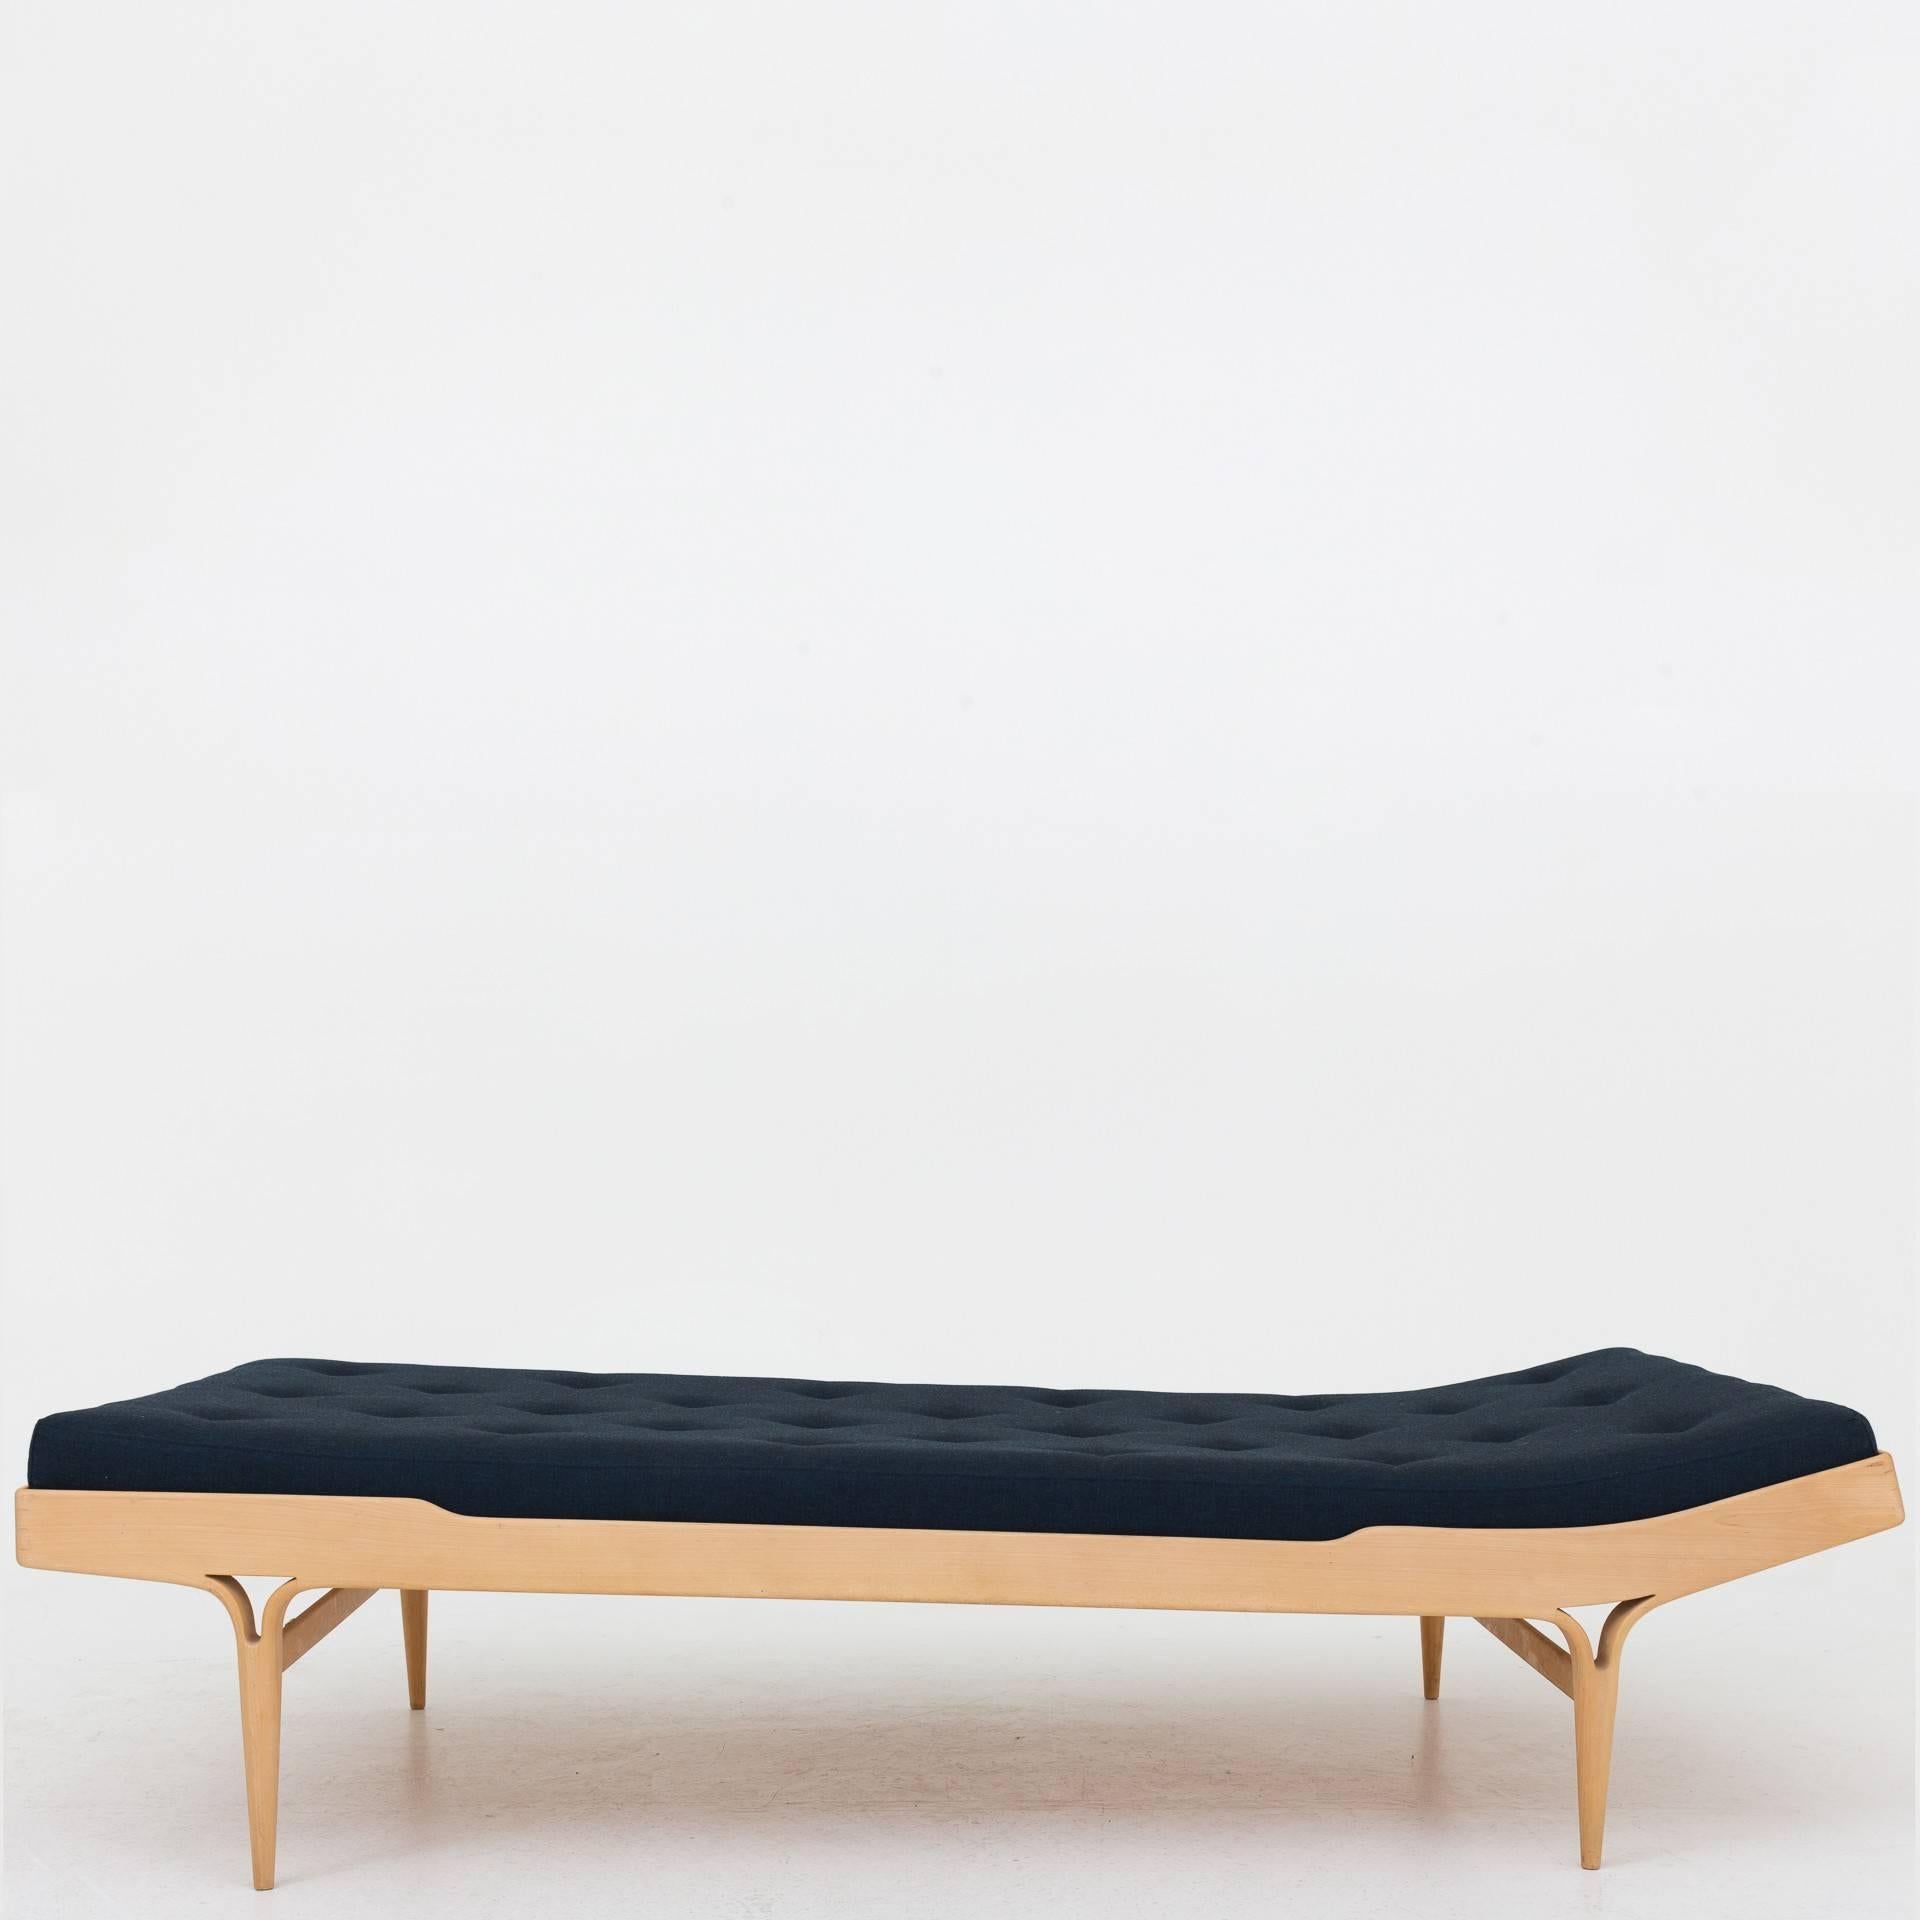 Daybed in beech, model T303 Berlin, with new Remix col. 873. Designed by Bruno Mathsson in 1957. Maker Artek.